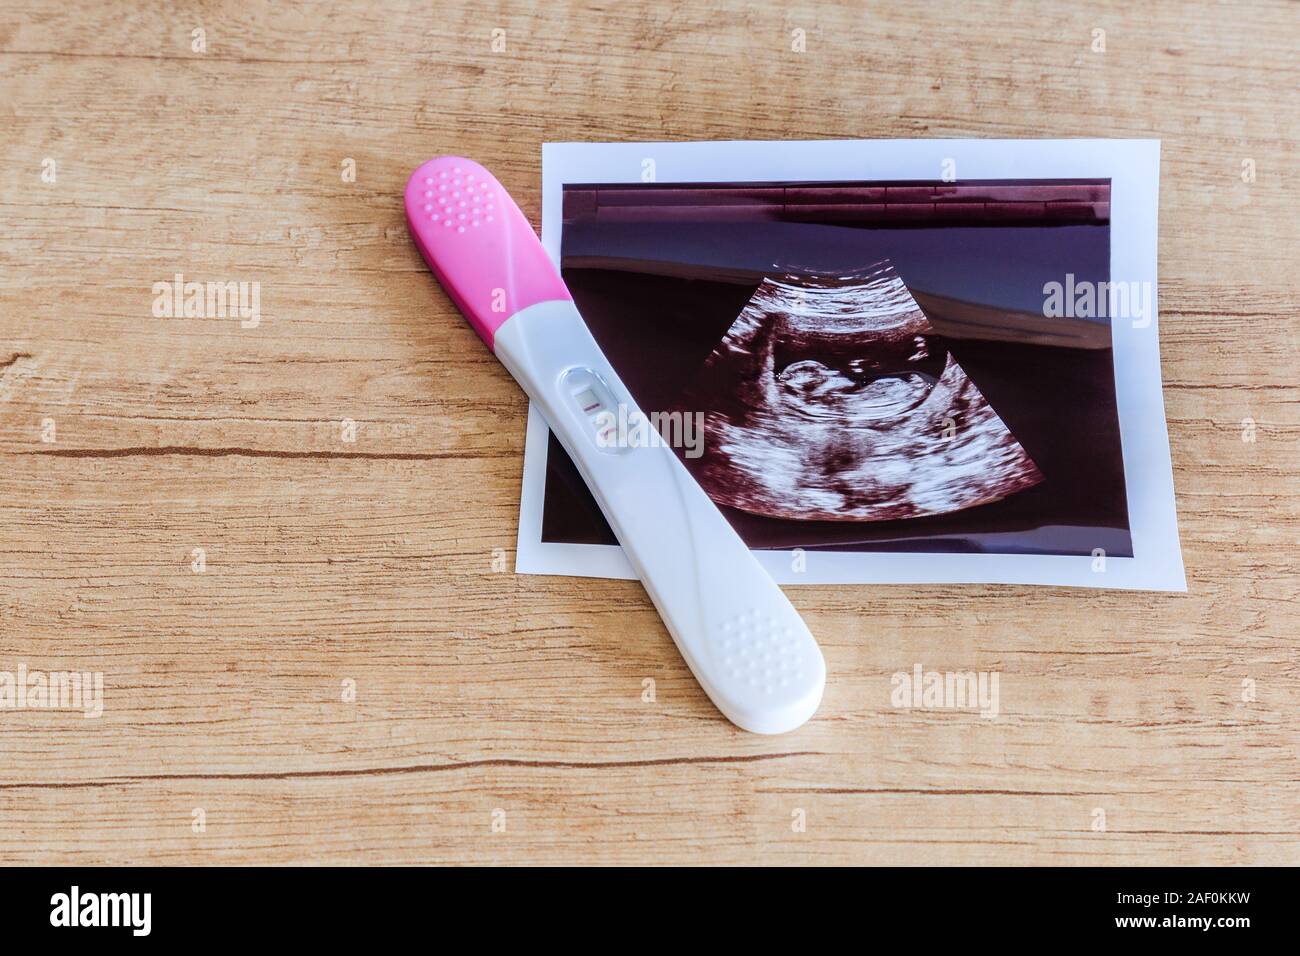 Pregnancy test showing a positive result and ultrasound image isolated on wooden background. Stock Photo